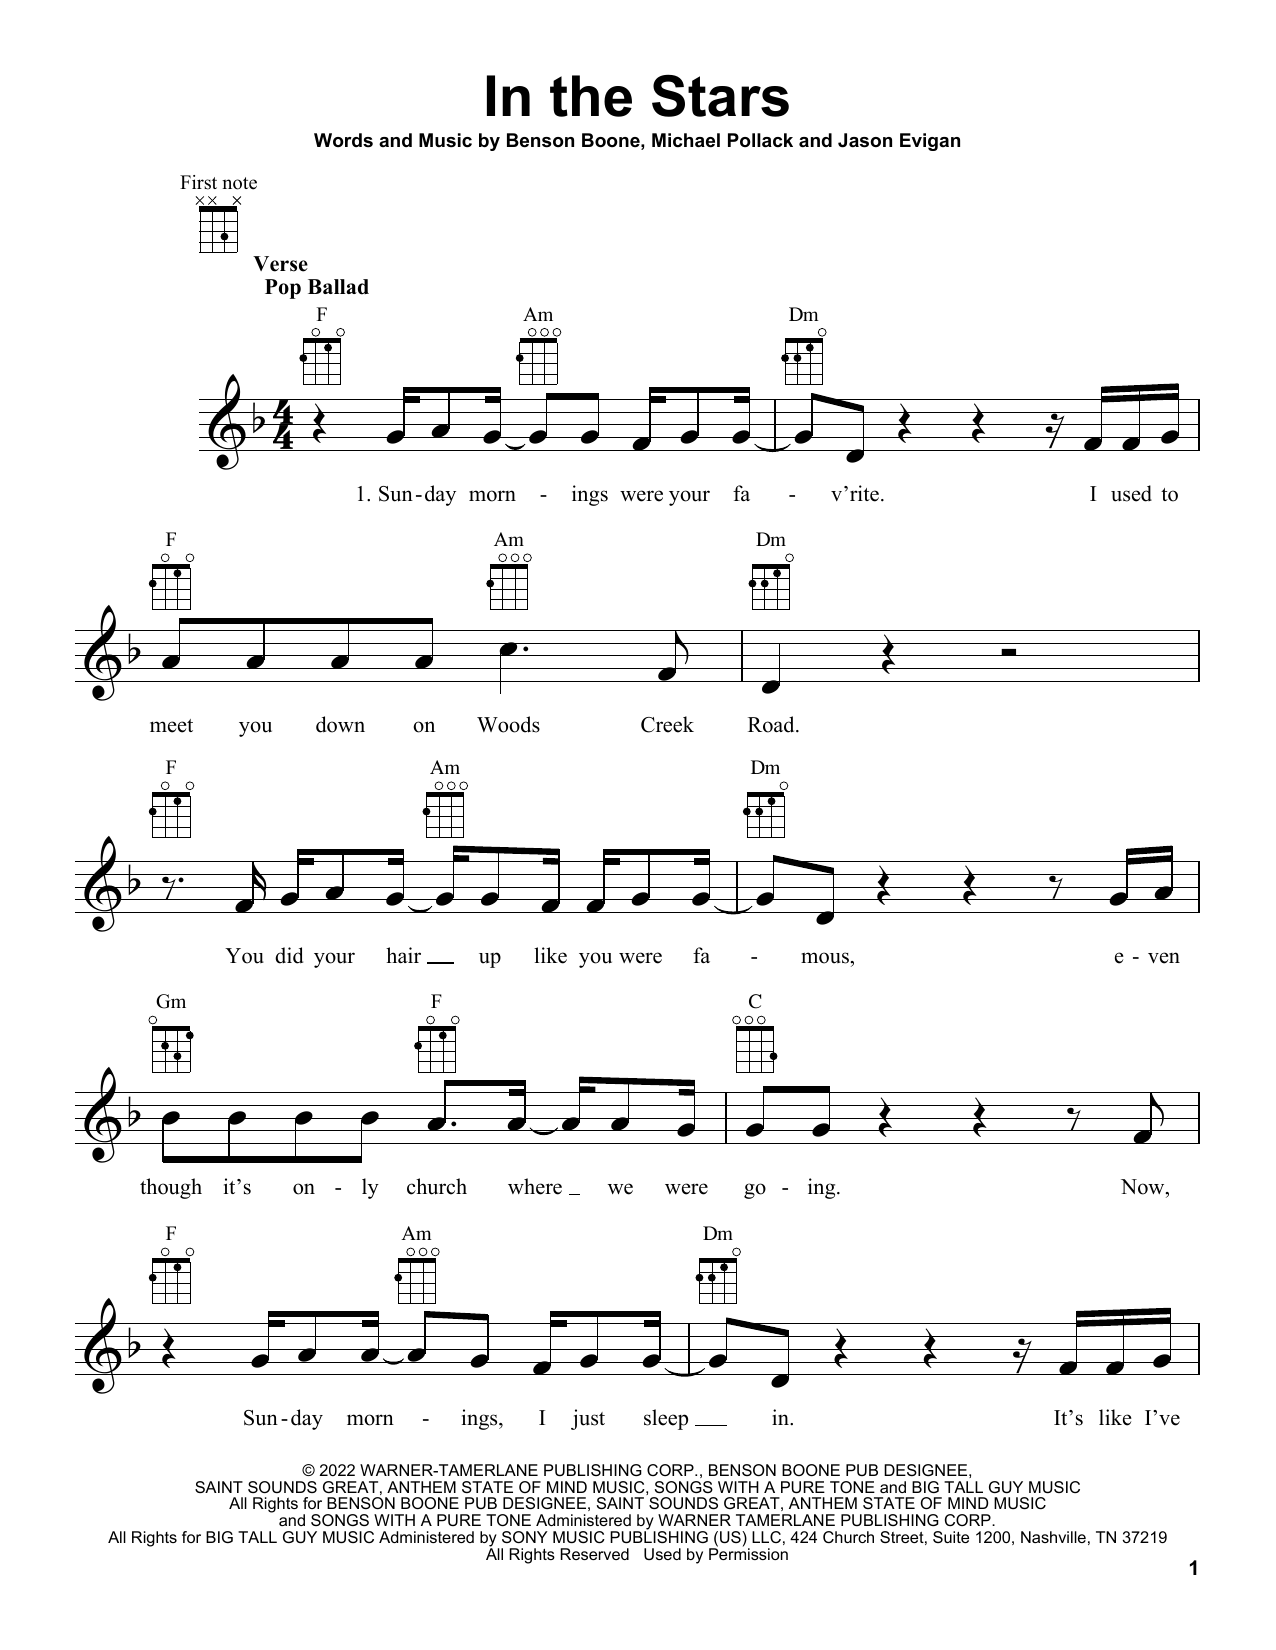 Download Benson Boone In The Stars Sheet Music